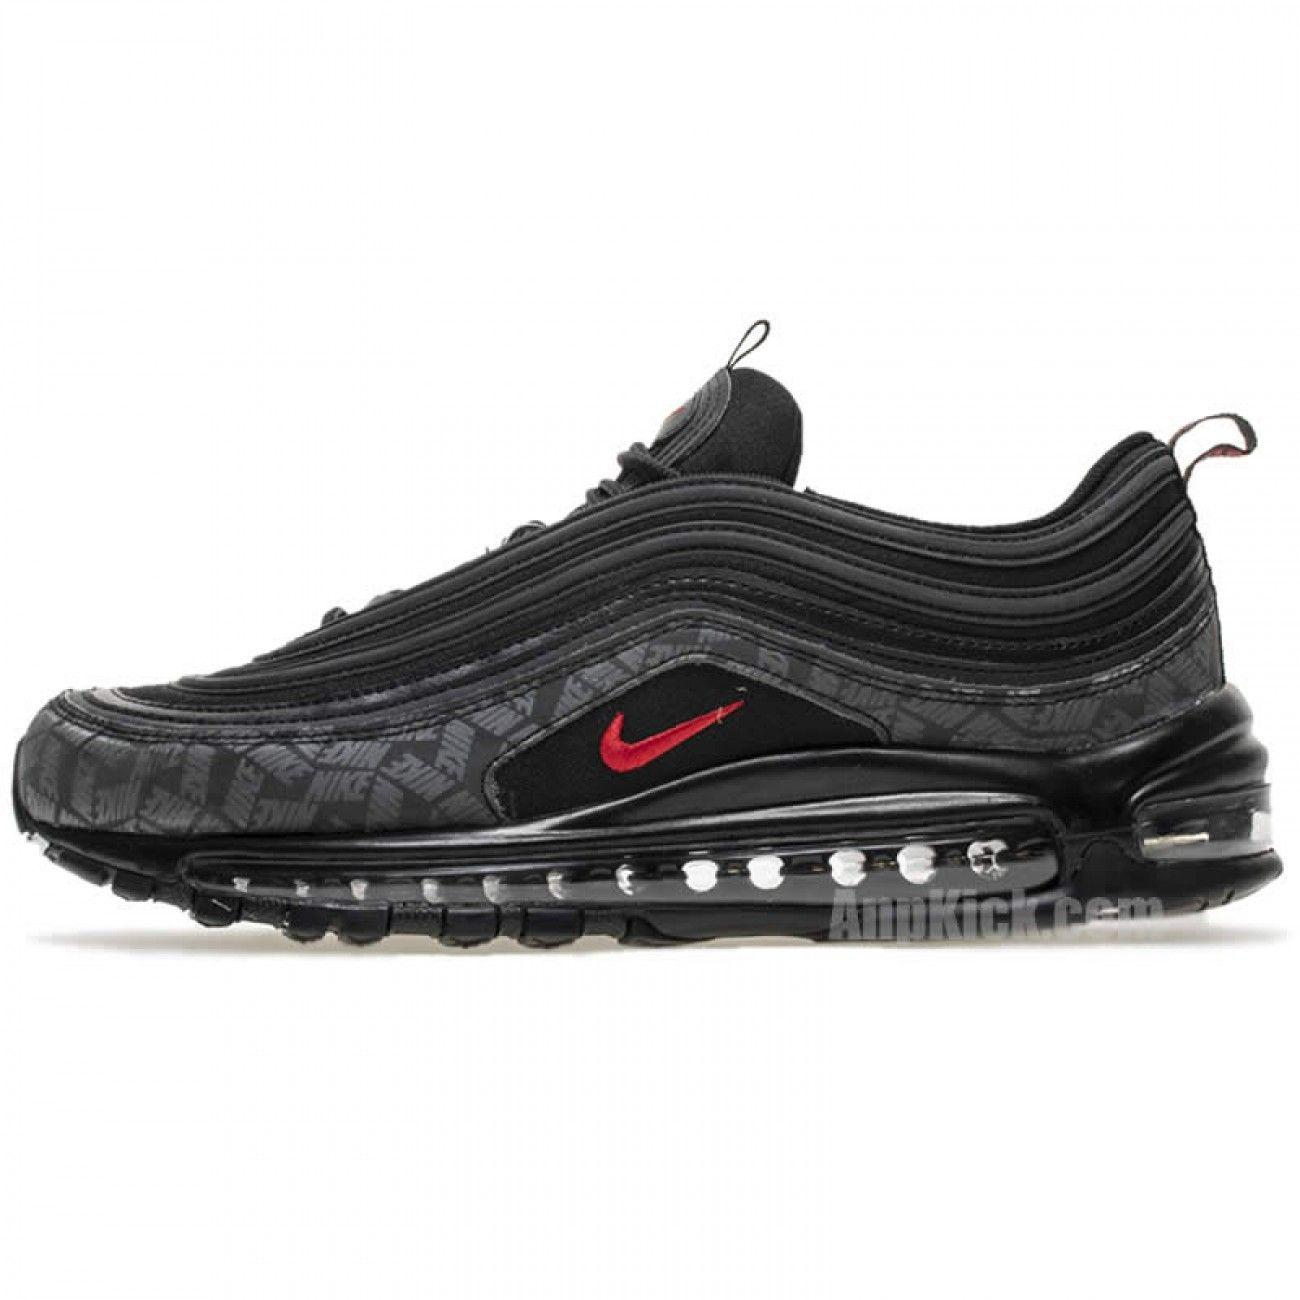 Black and Red Nike Logo - Nike Air Max 97 Reflective Logo All Black And Red 97s Sale AR4259 001